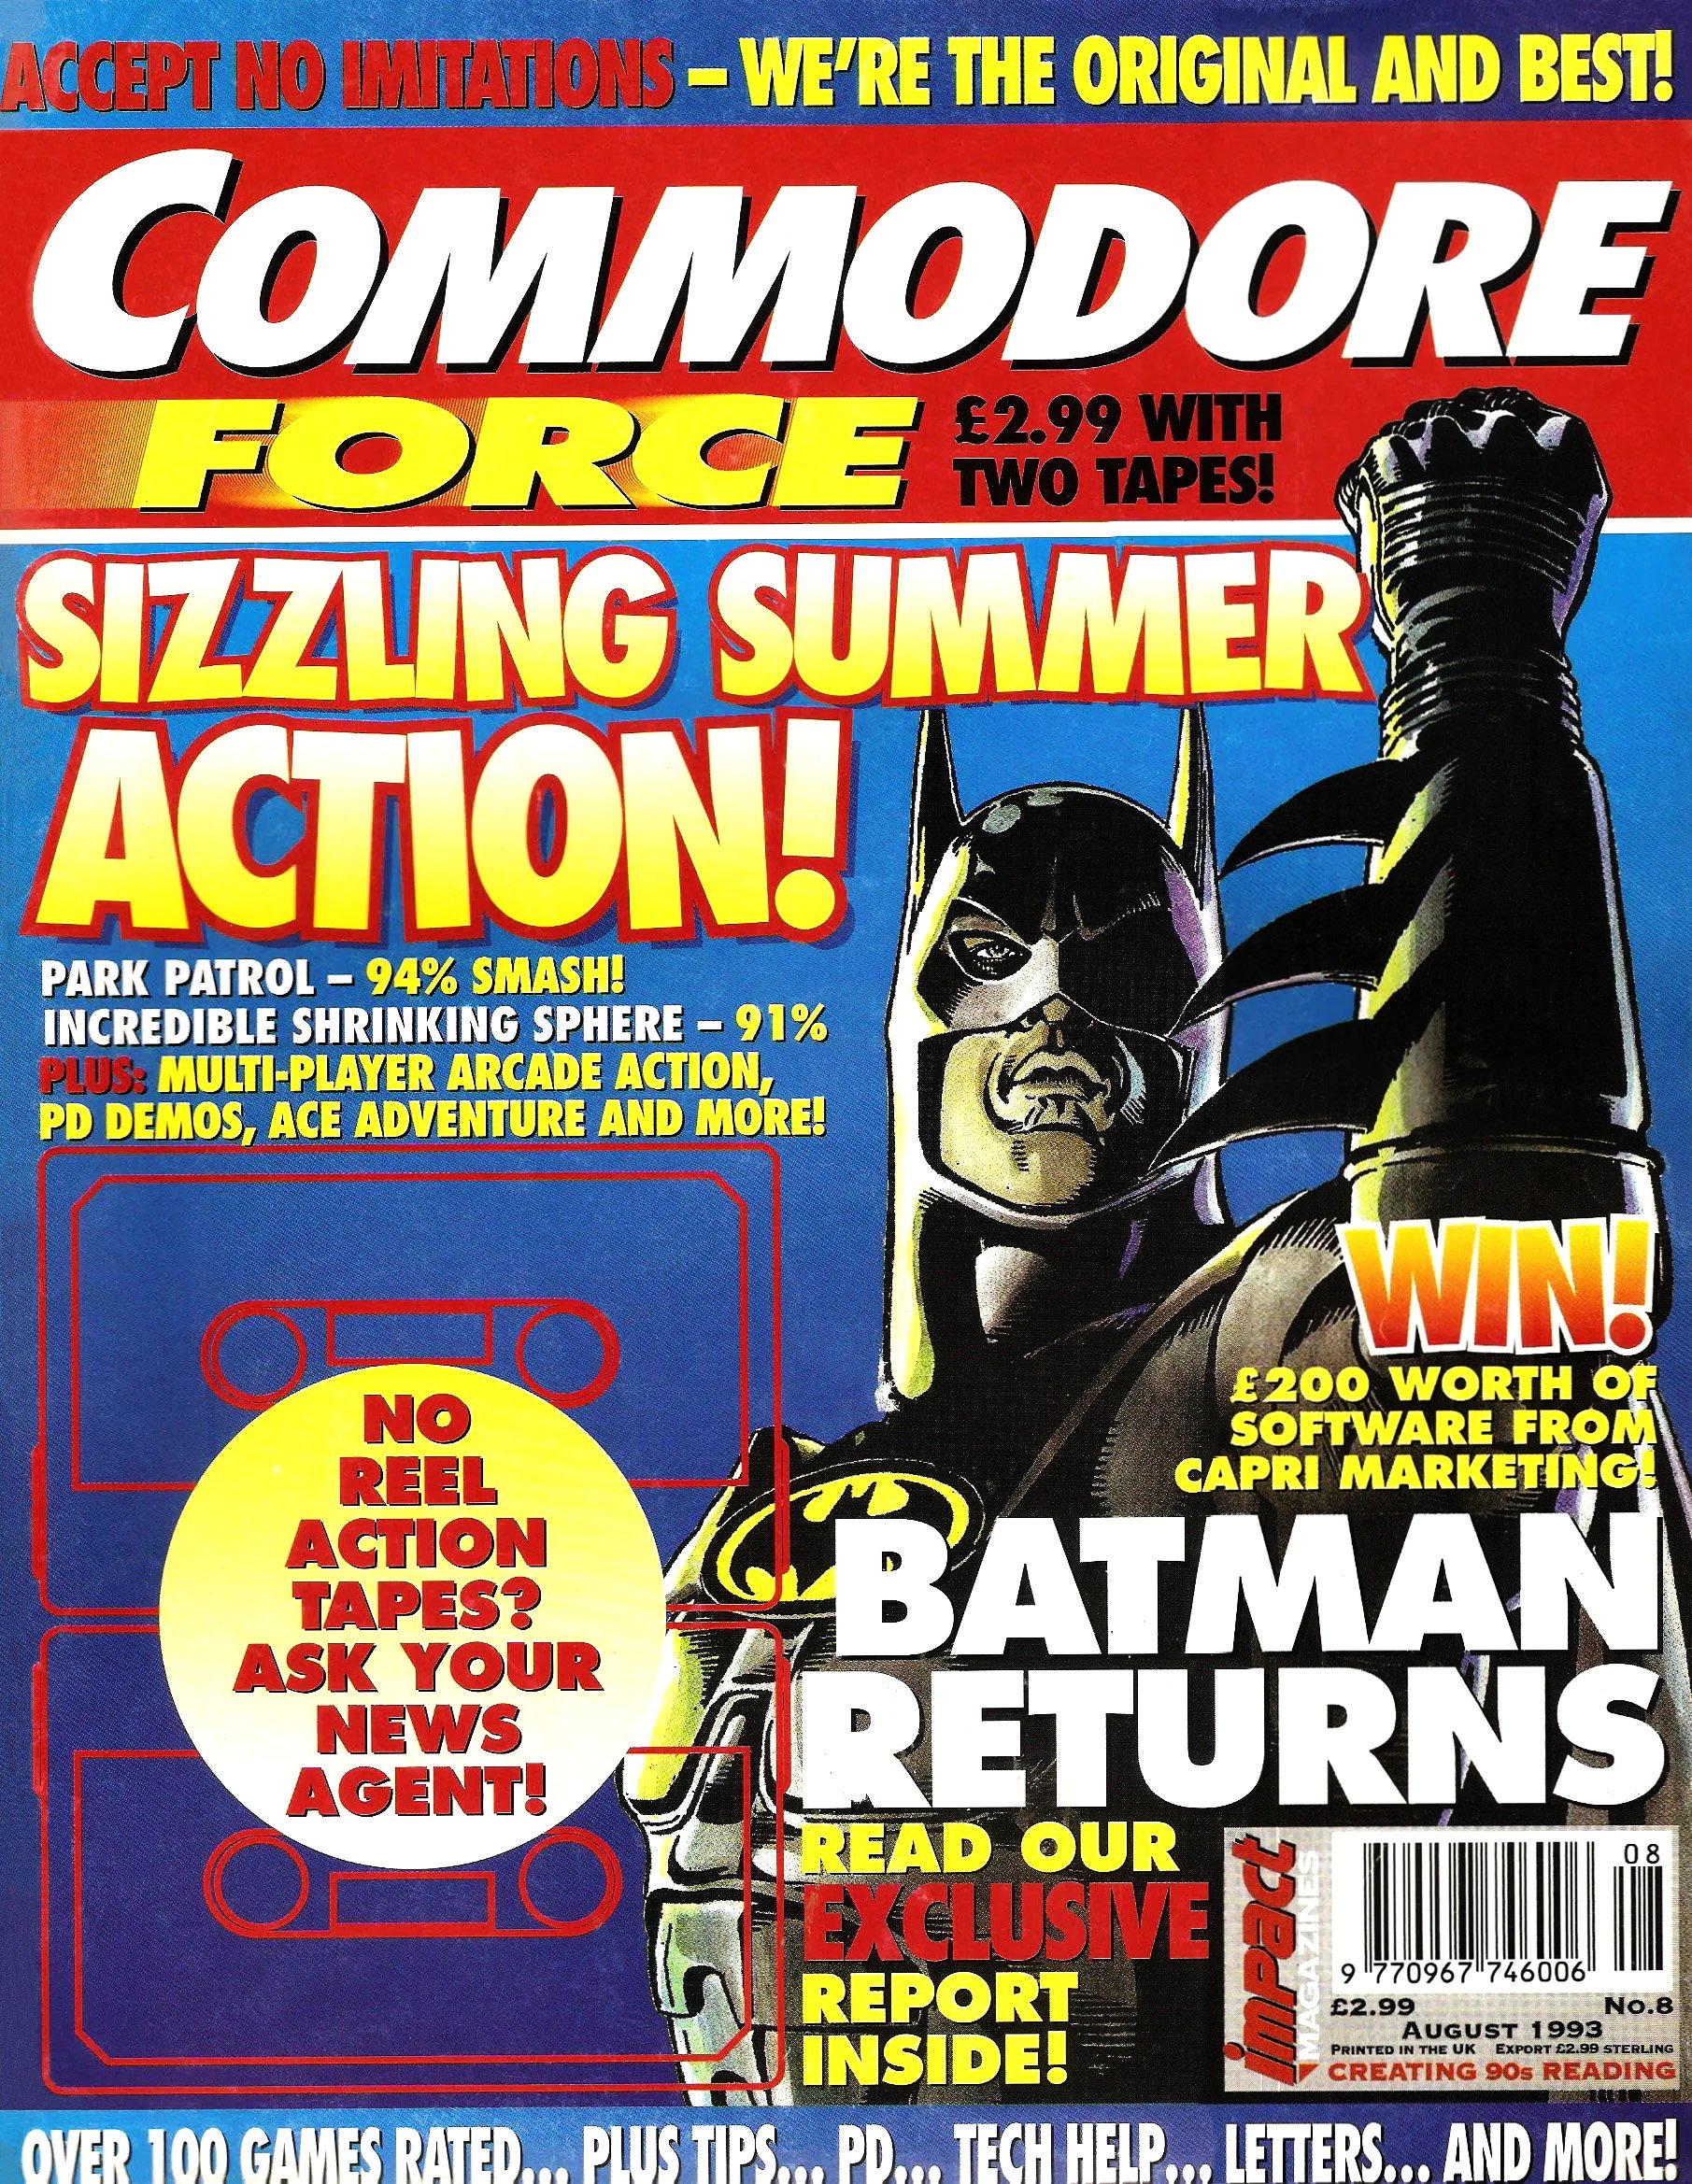 Commodore Force 08 (August 1993)